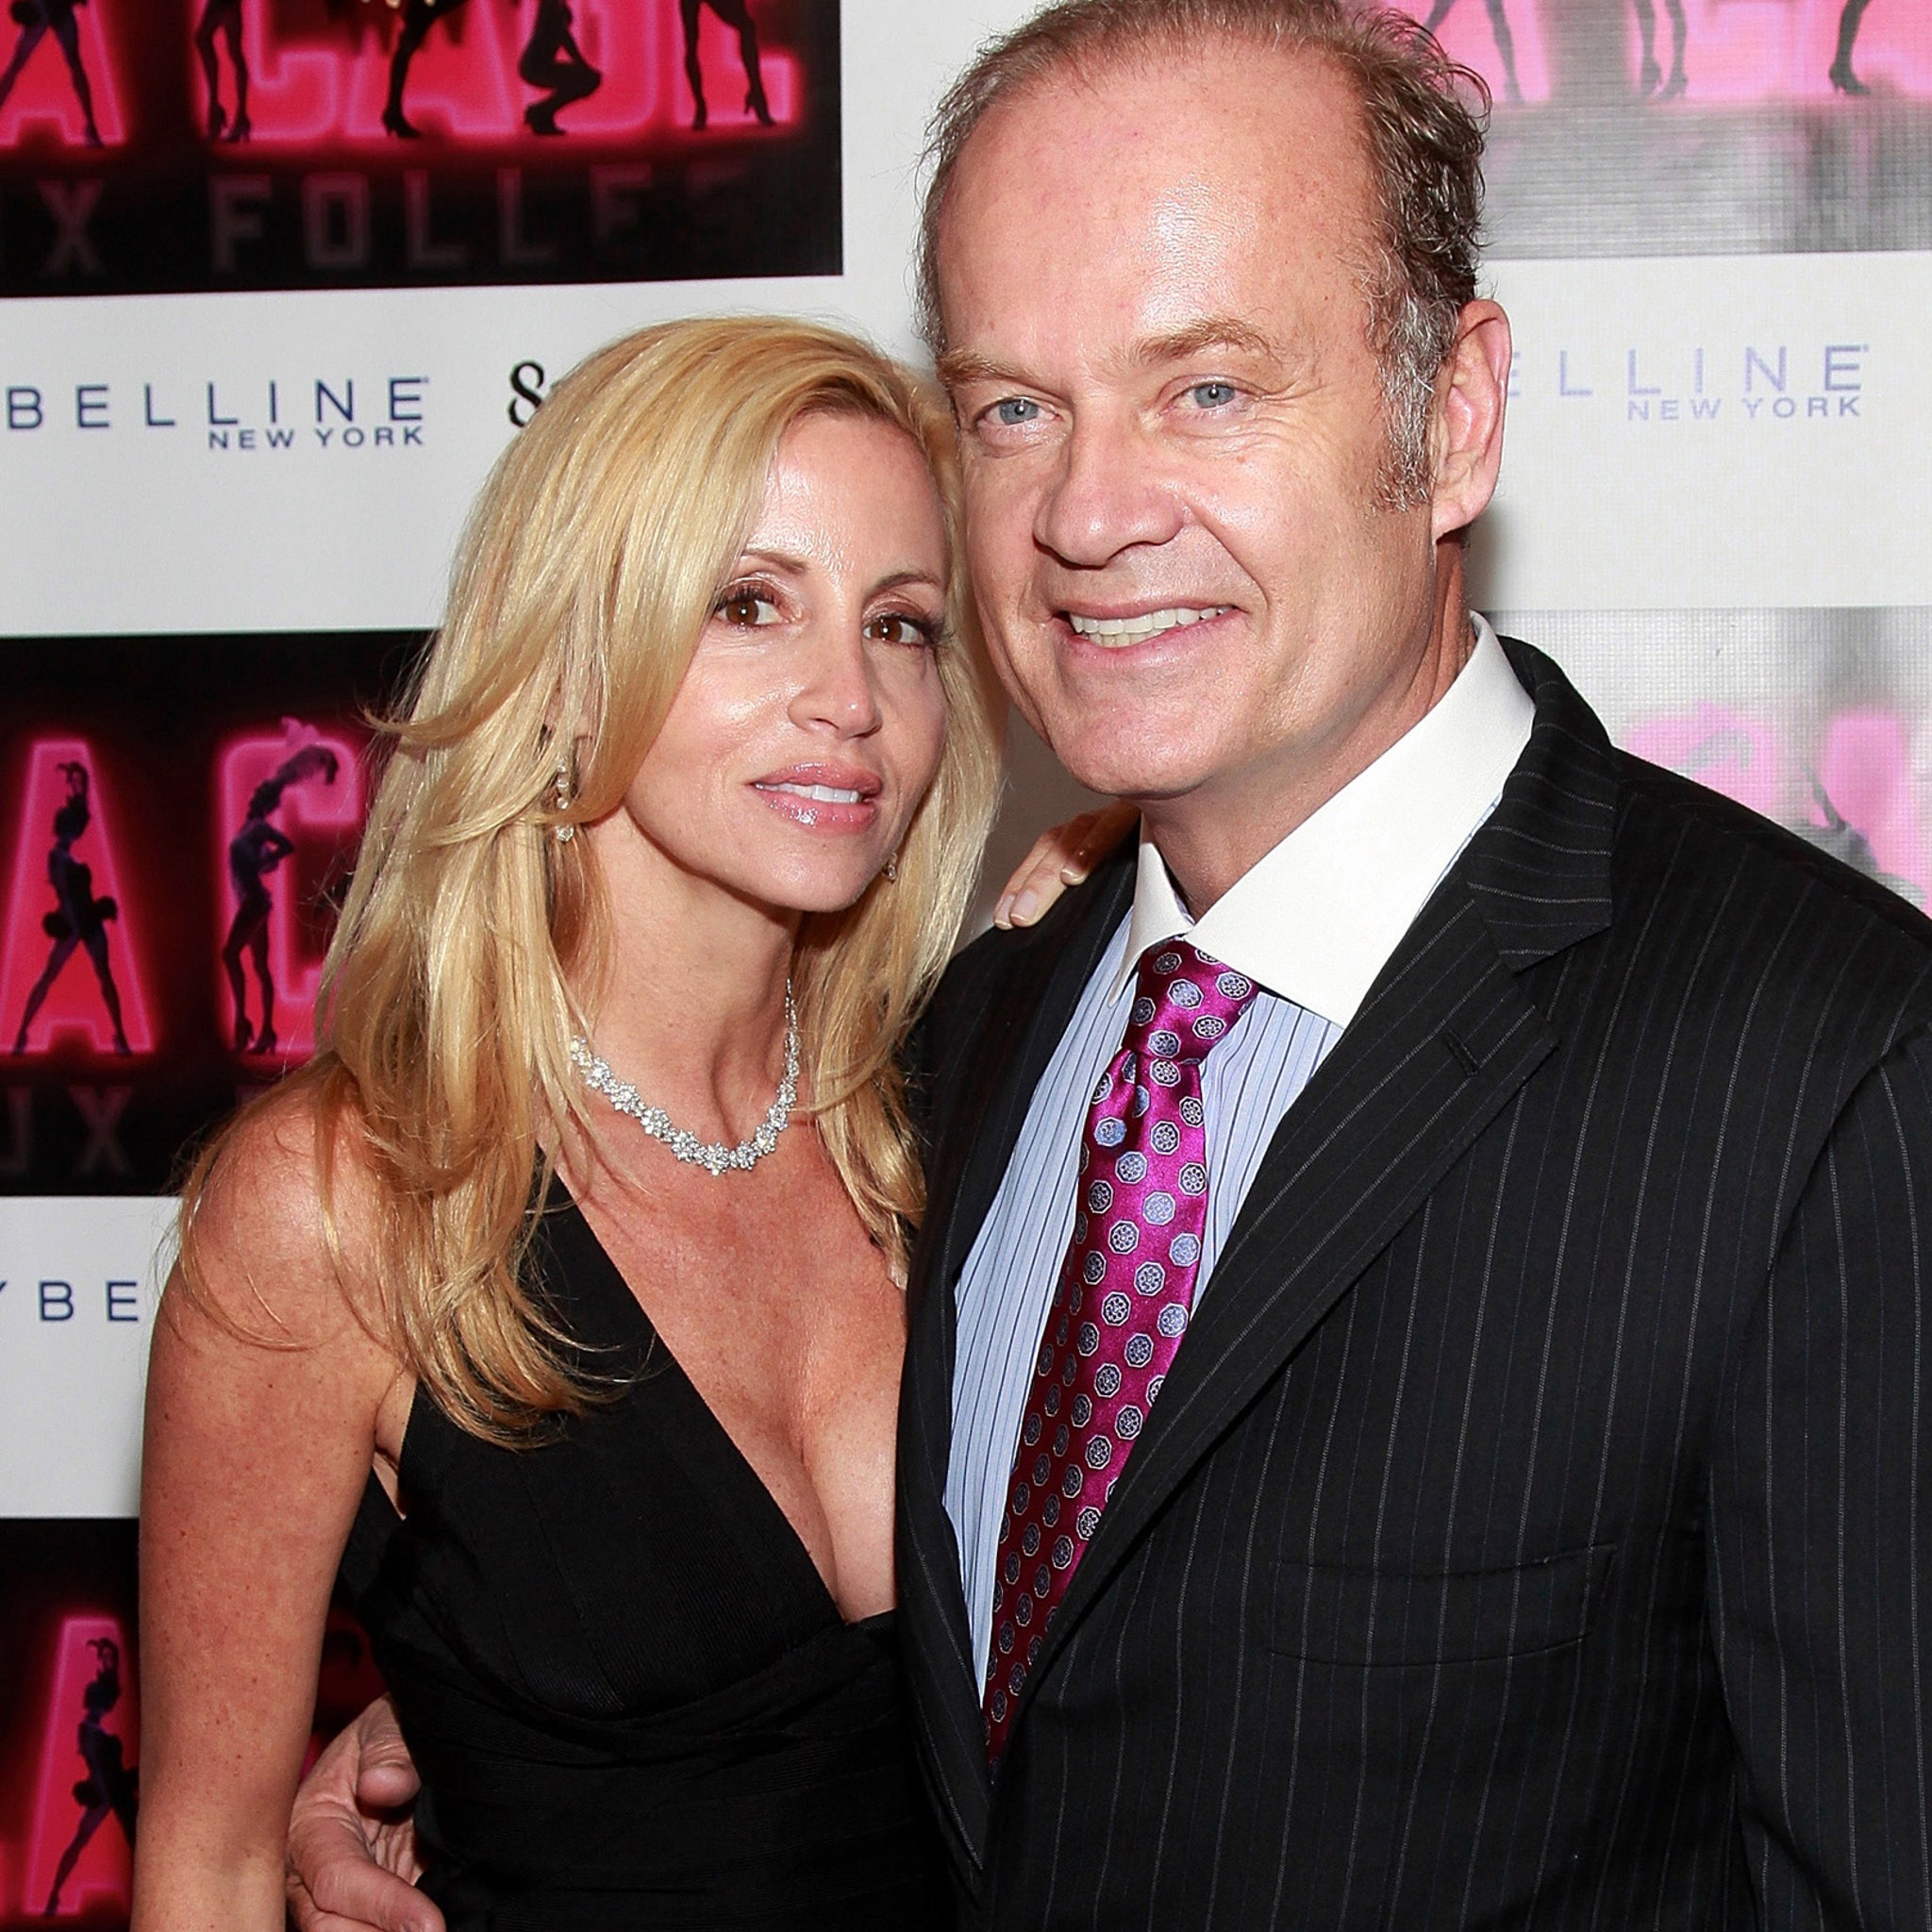 The Real Housewives of Beverly Hills' Camille Grammer Is Married